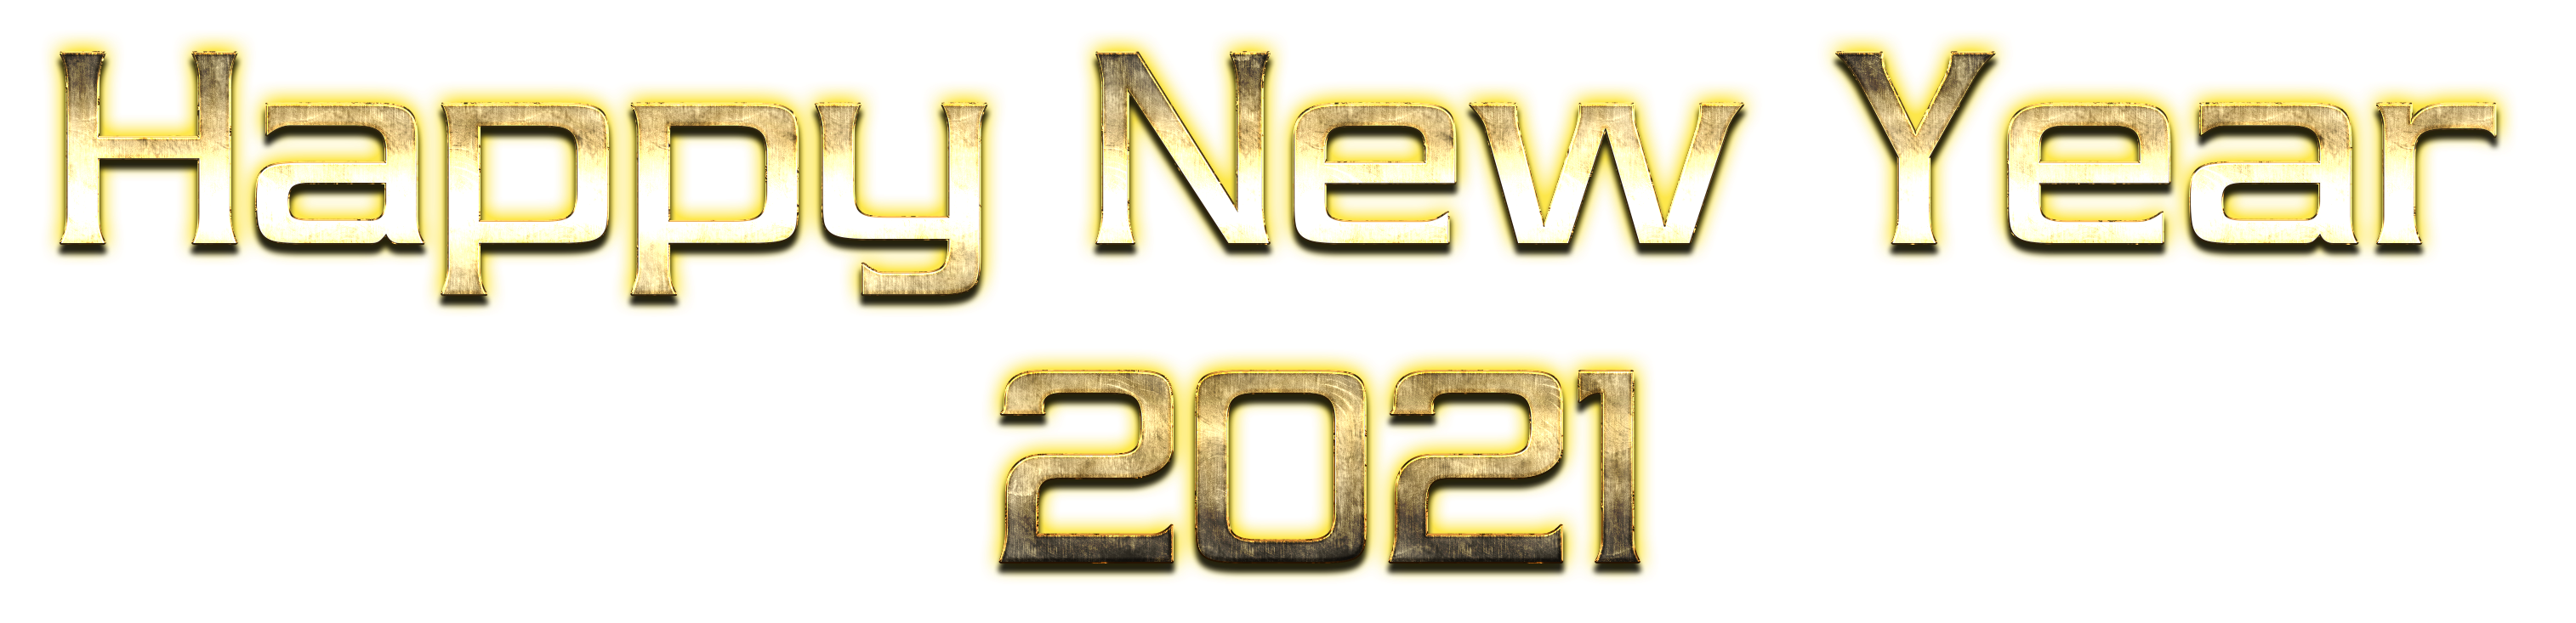 Happy New Year 2021 PNG Images Transparent Background | PNG Play